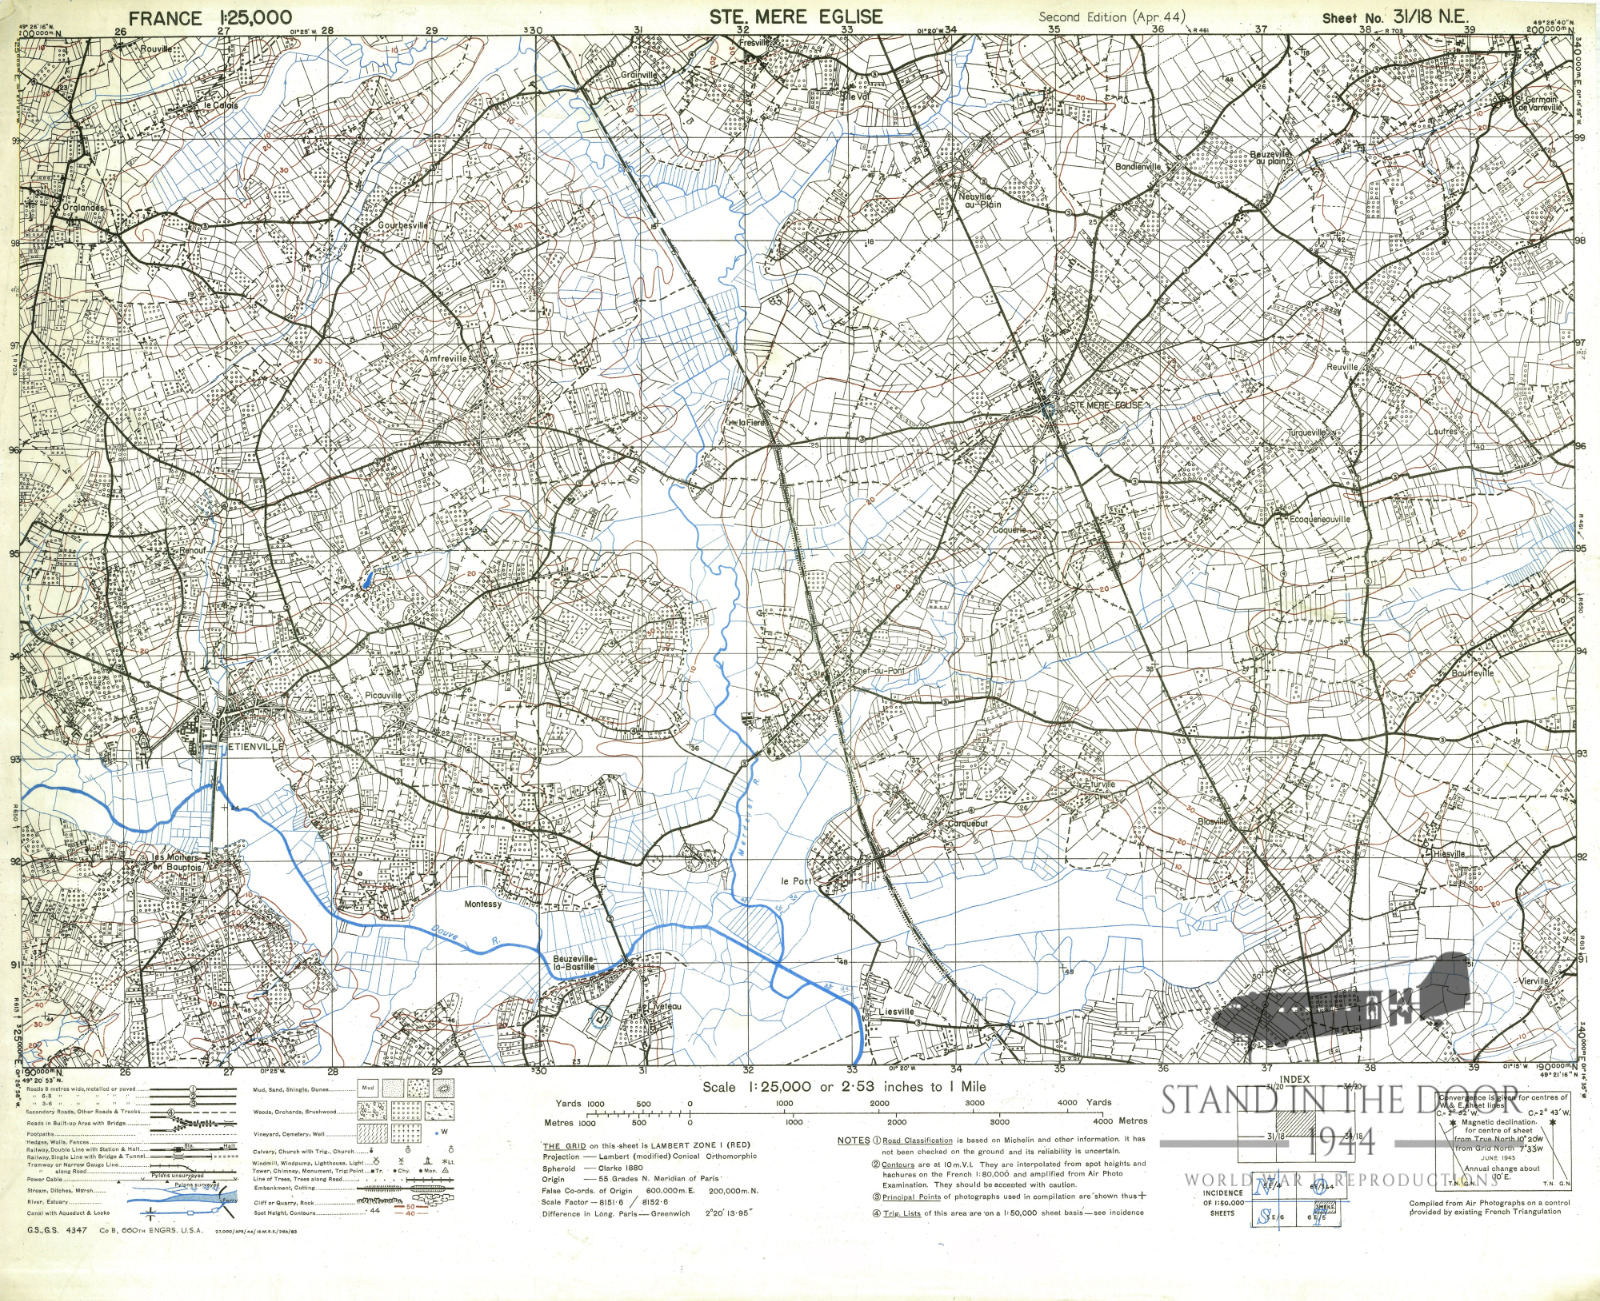 WW2 Normandy D-Day map 1 Ste Mere Eglise